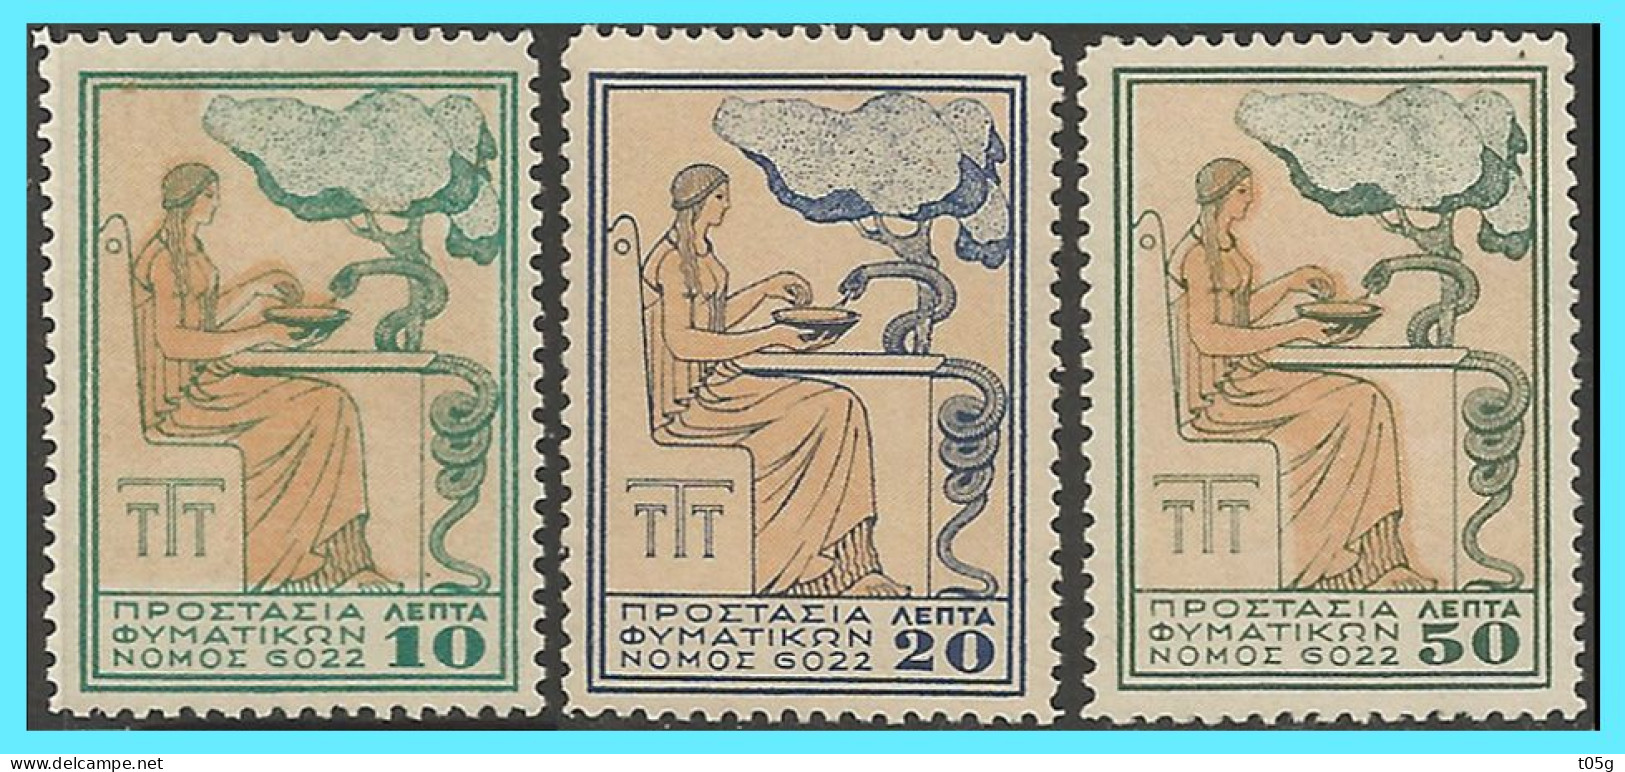 GREECE- GRECE - HELLAS CHARITY STAMPS 1934: "Protection For Tuberculosis Patients" Without " ELLAS Complet Set MNH** - Bienfaisance